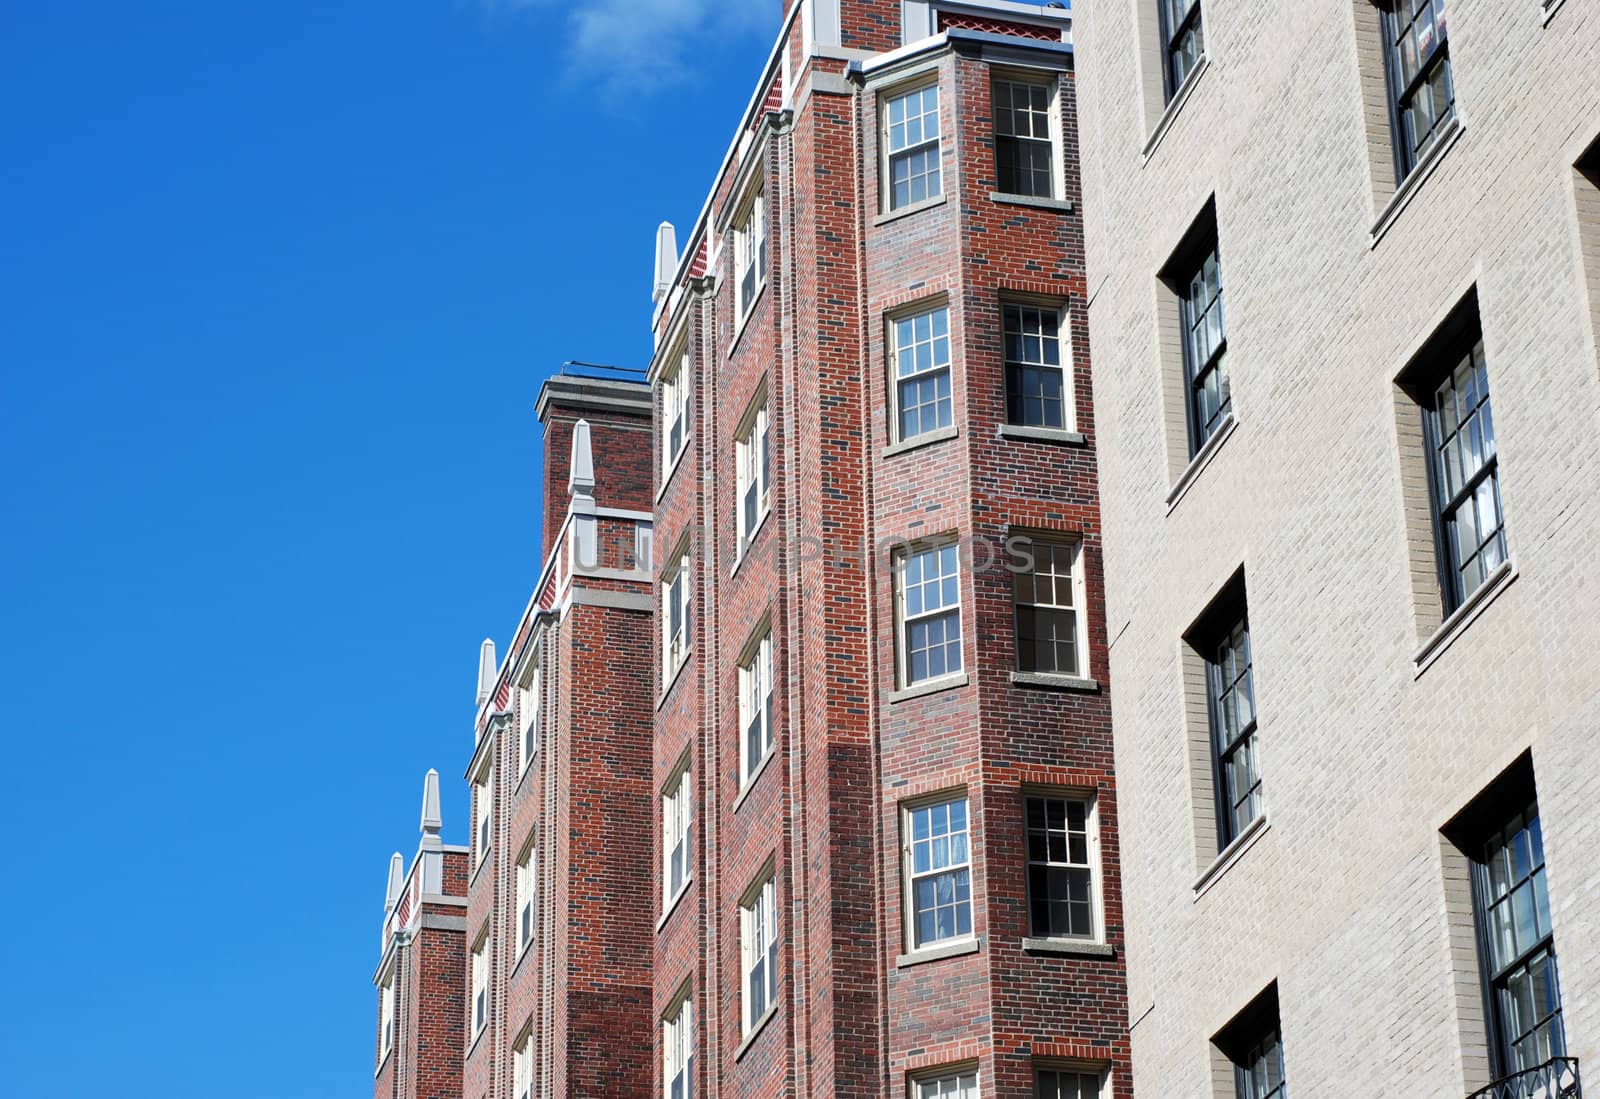 urban brick apartment buildings from below with blue sky